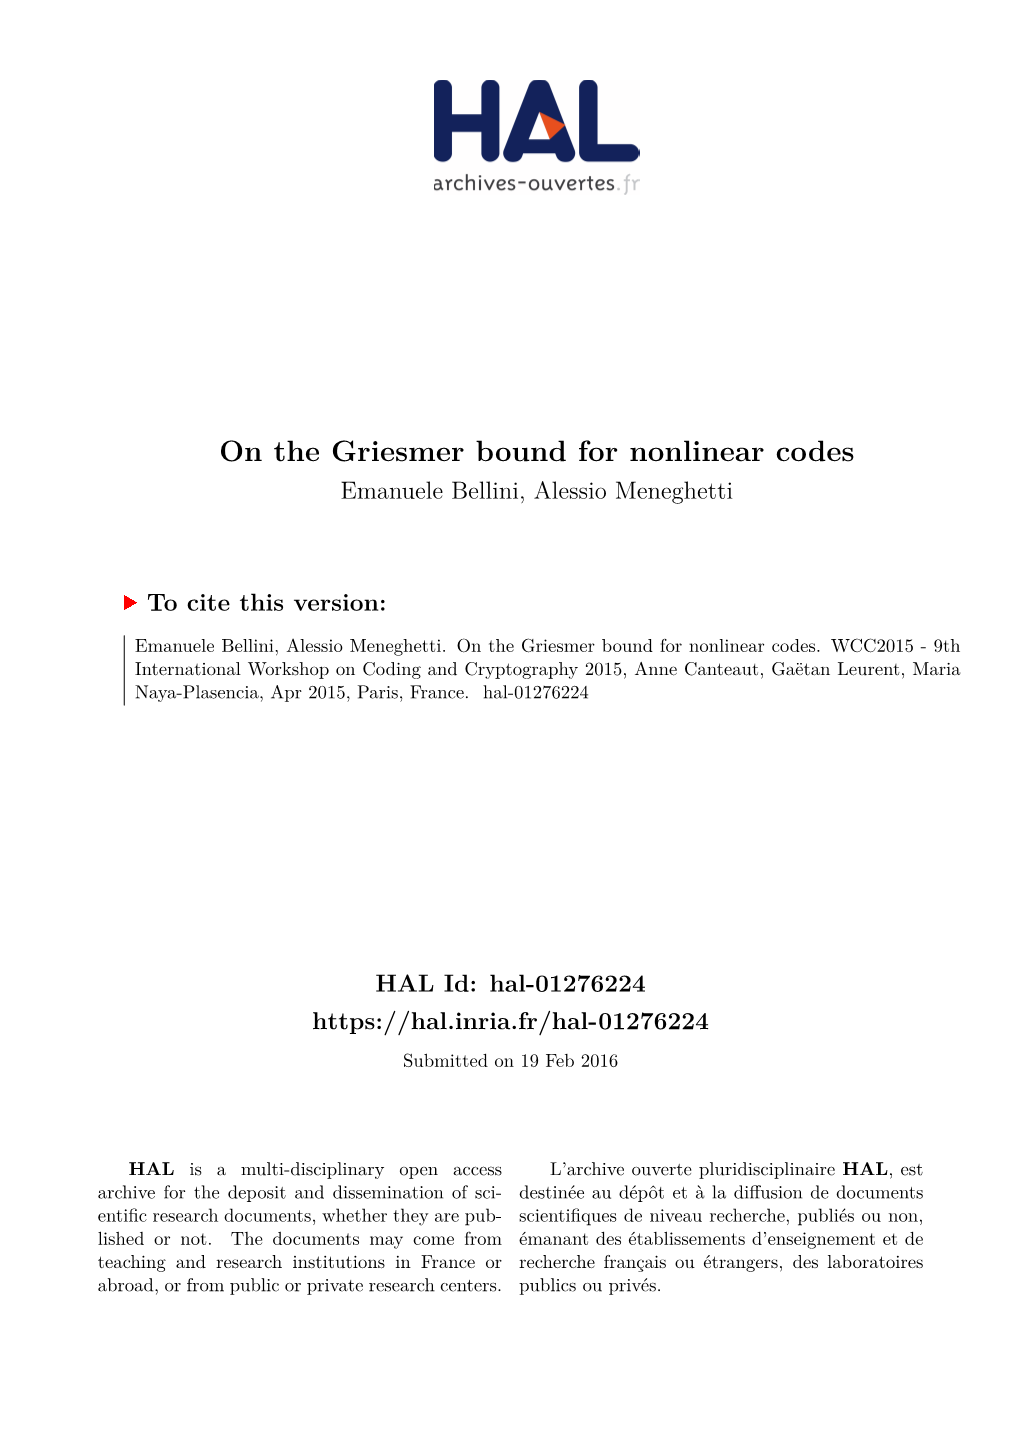 On the Griesmer Bound for Nonlinear Codes Emanuele Bellini, Alessio Meneghetti